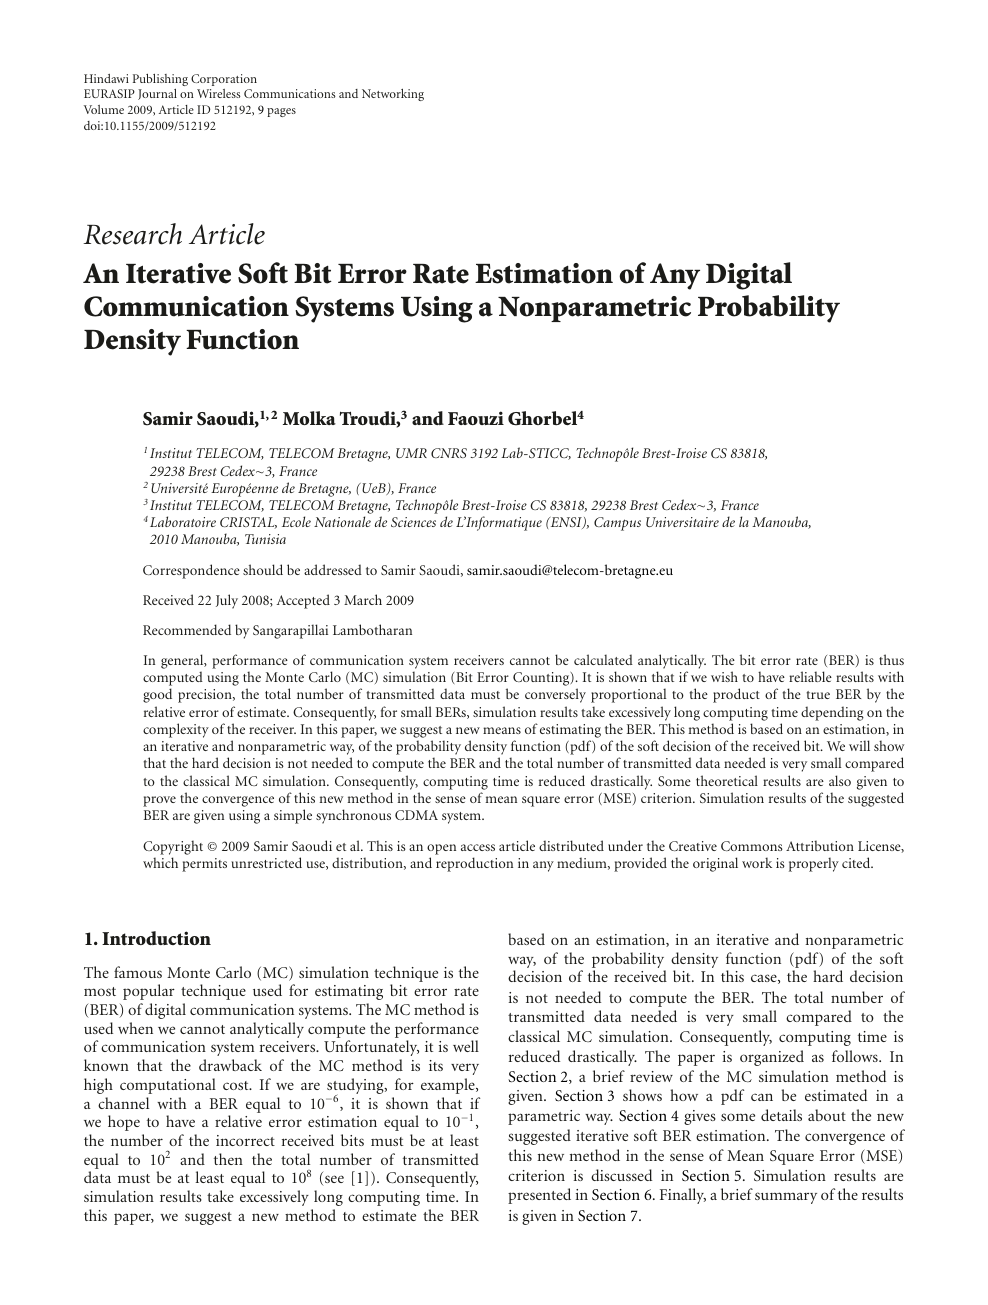 An Iterative Soft Bit Error Rate Estimation Of Any Digital Communication Systems Using A Nonparametric Probability Density Function Topic Of Research Paper In Computer And Information Sciences Download Scholarly Article Pdf